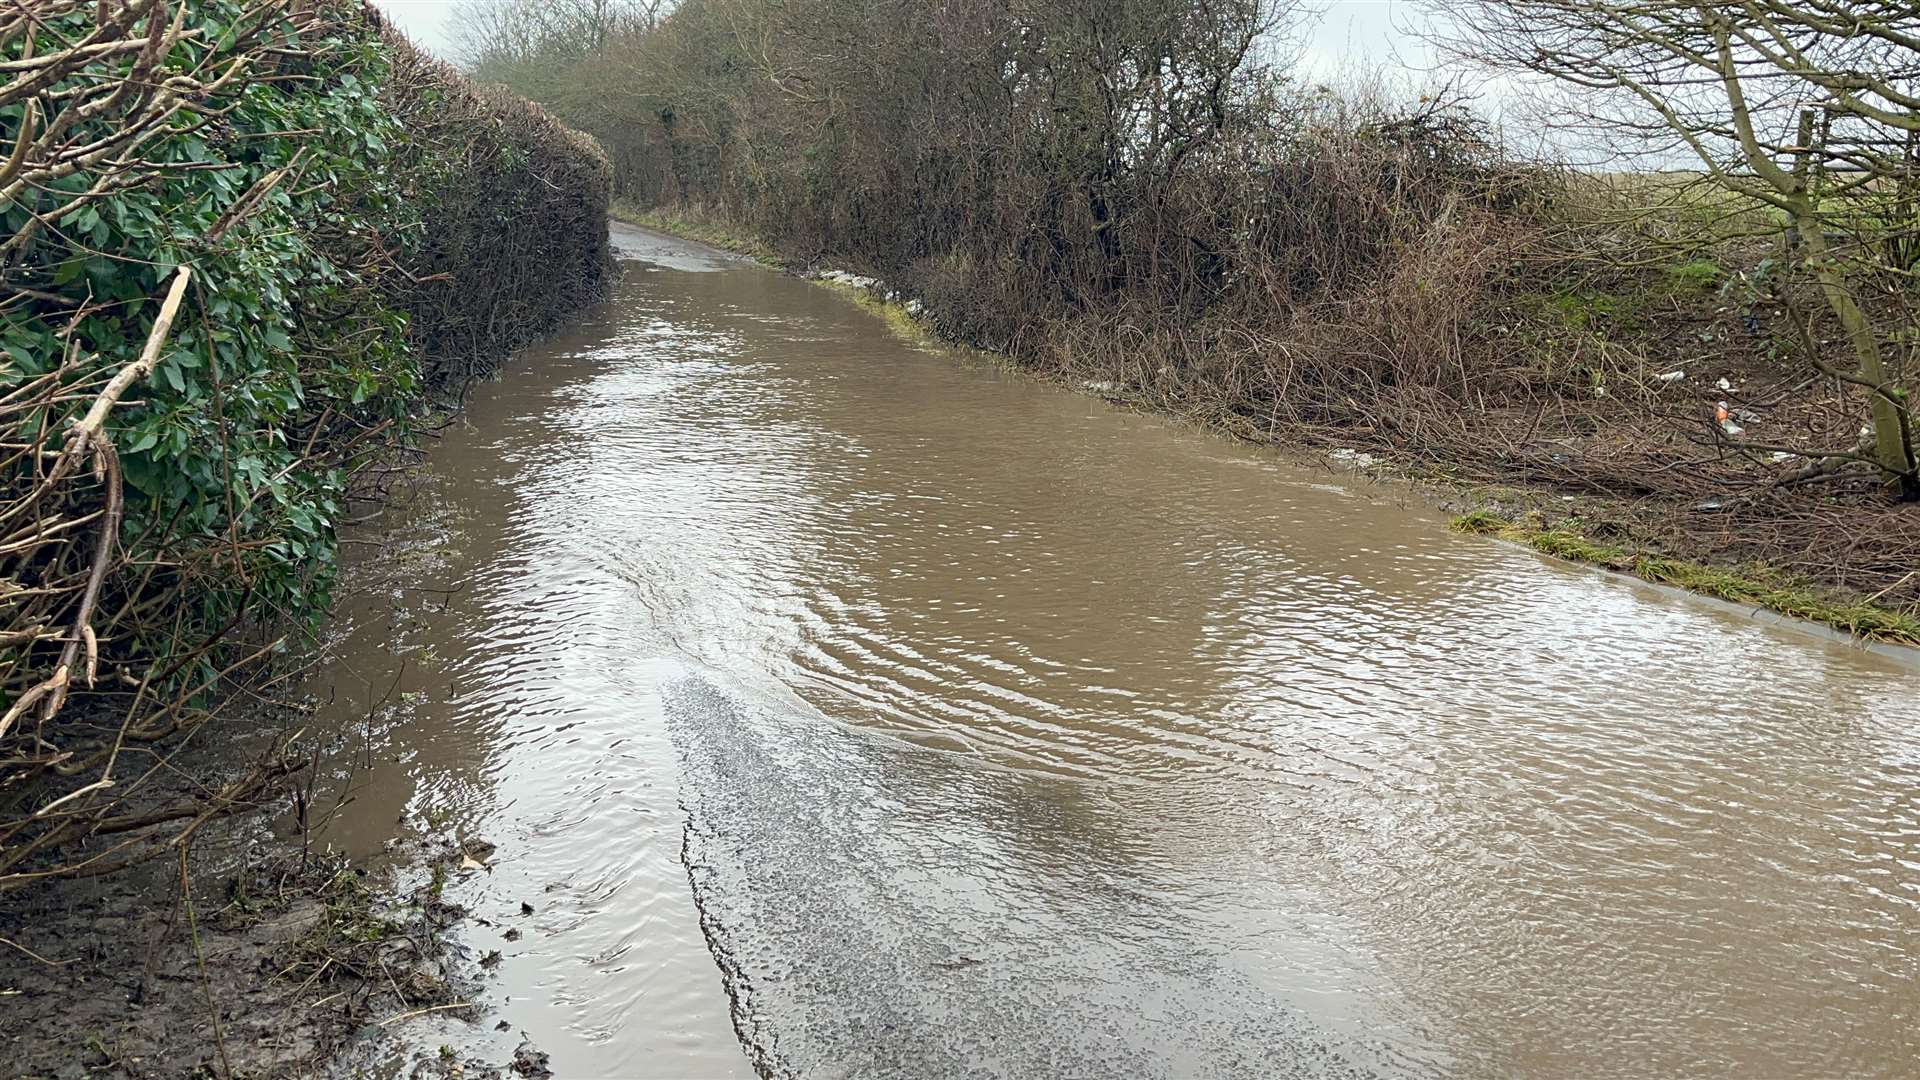 Many cars have fallen foul of flooding in West Hougham